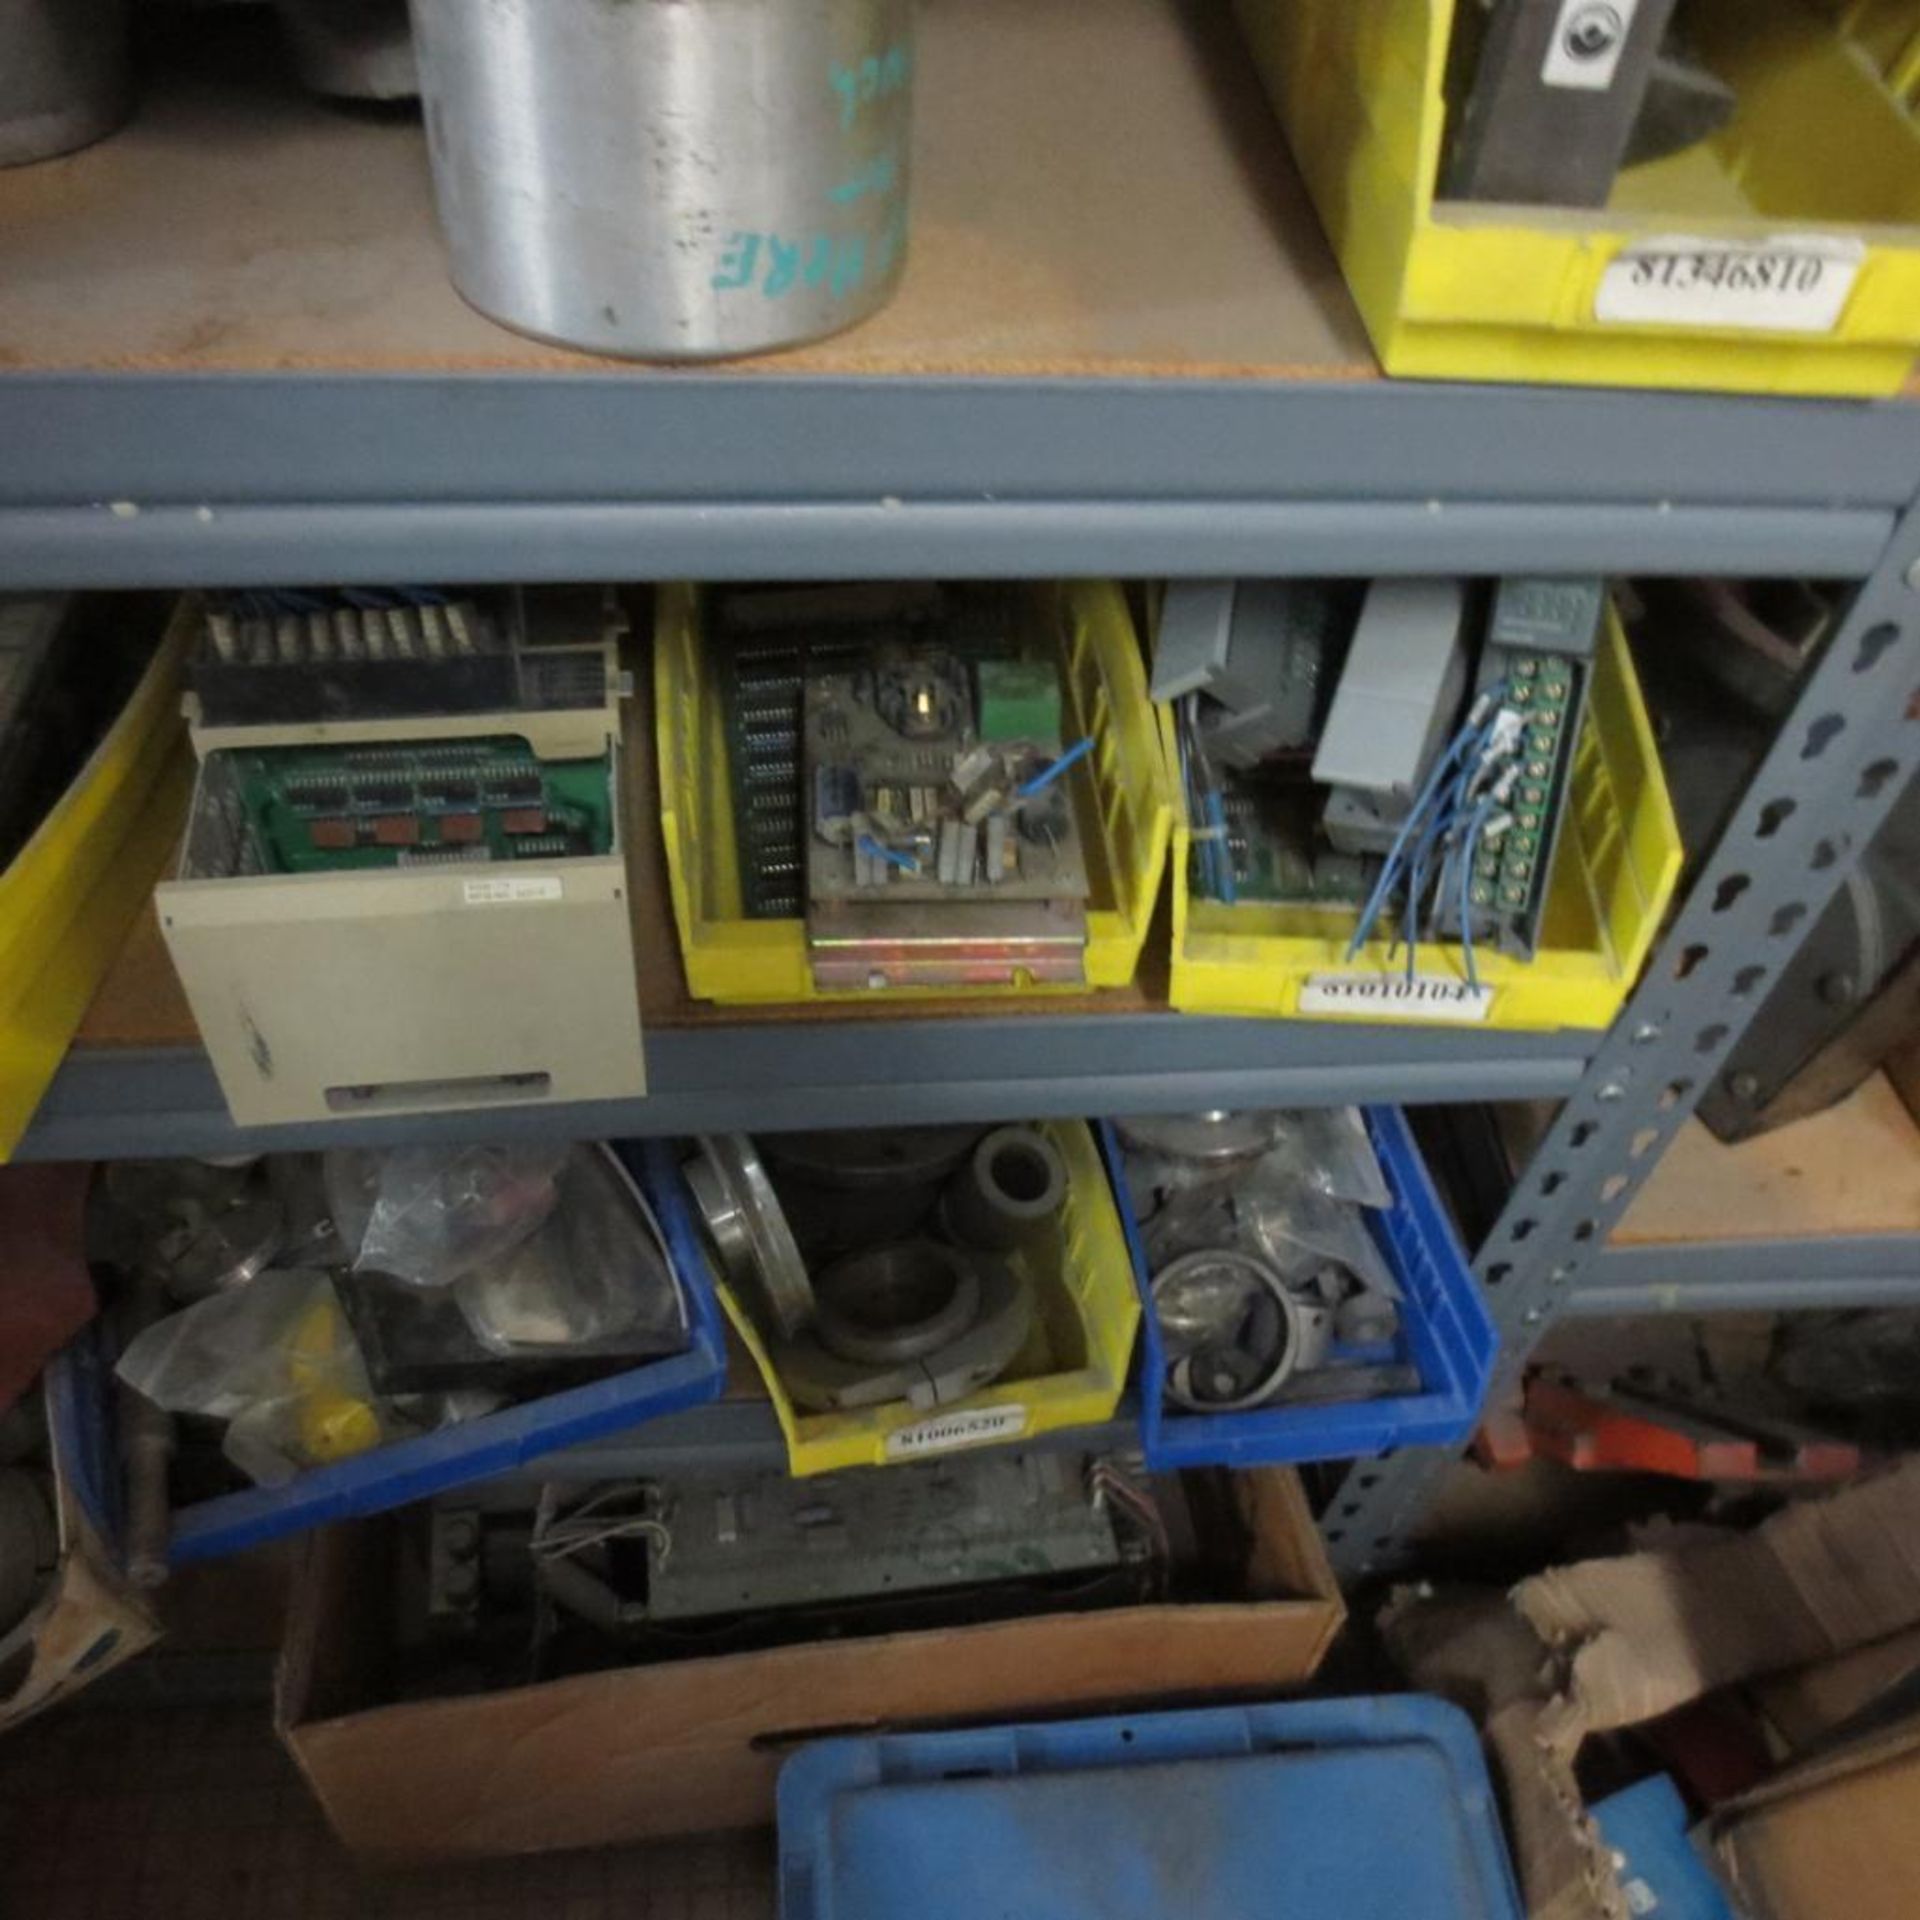 Parts Room Consisting of Gears, Electric Boards, Motors, AB Item, Filters, Motor Starters and Parts - Image 21 of 42